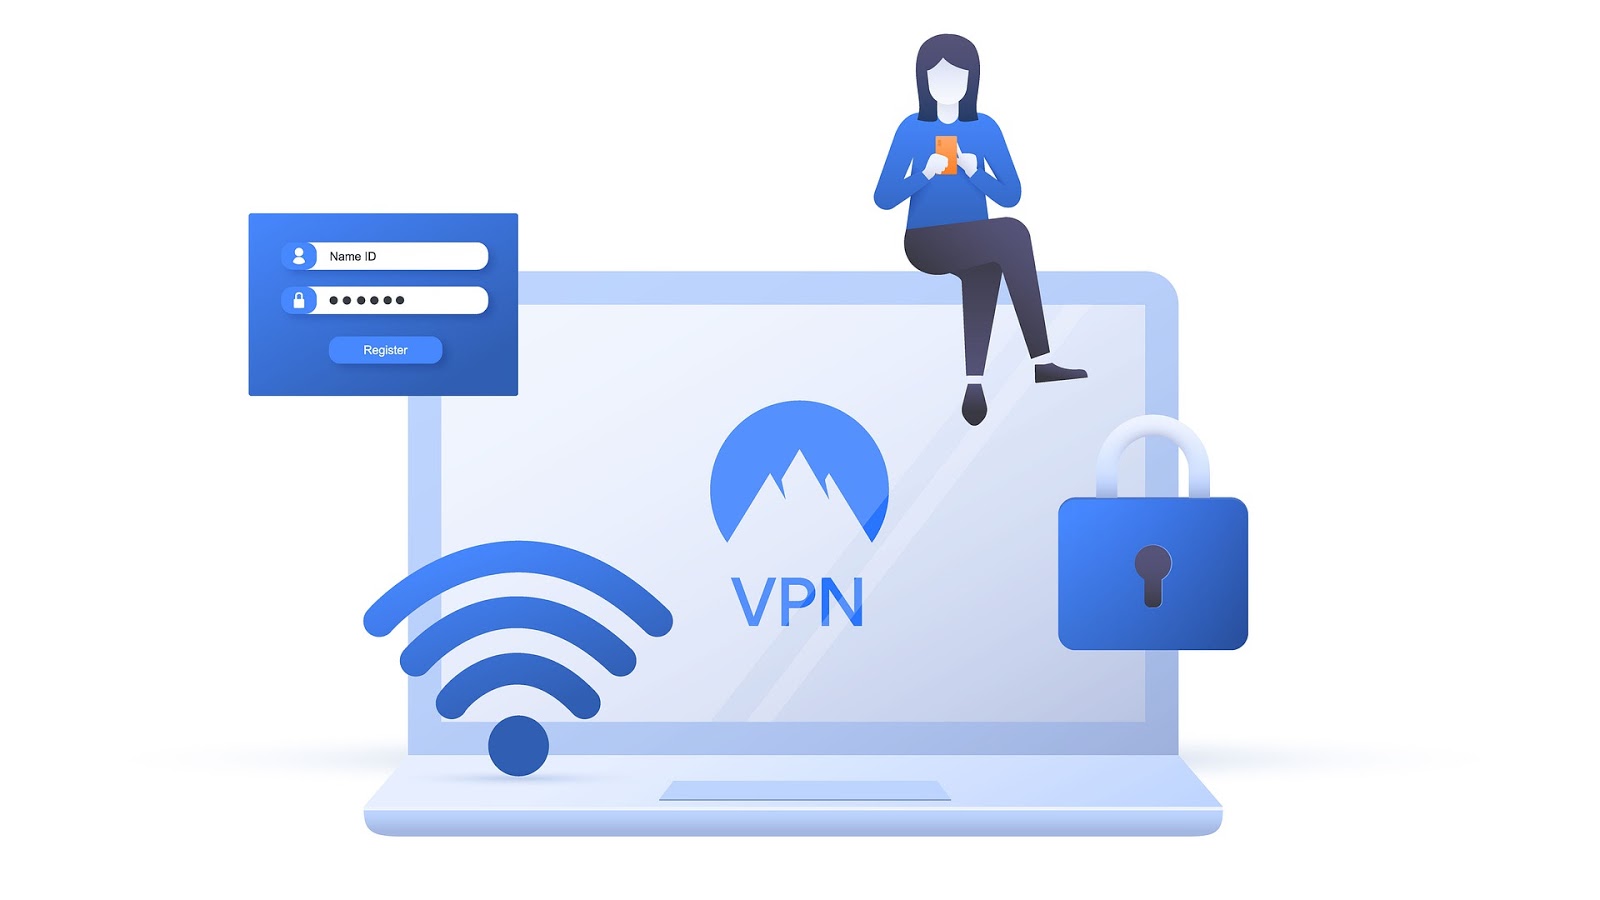 Virtual Private Network: What is it and How Does it Work?